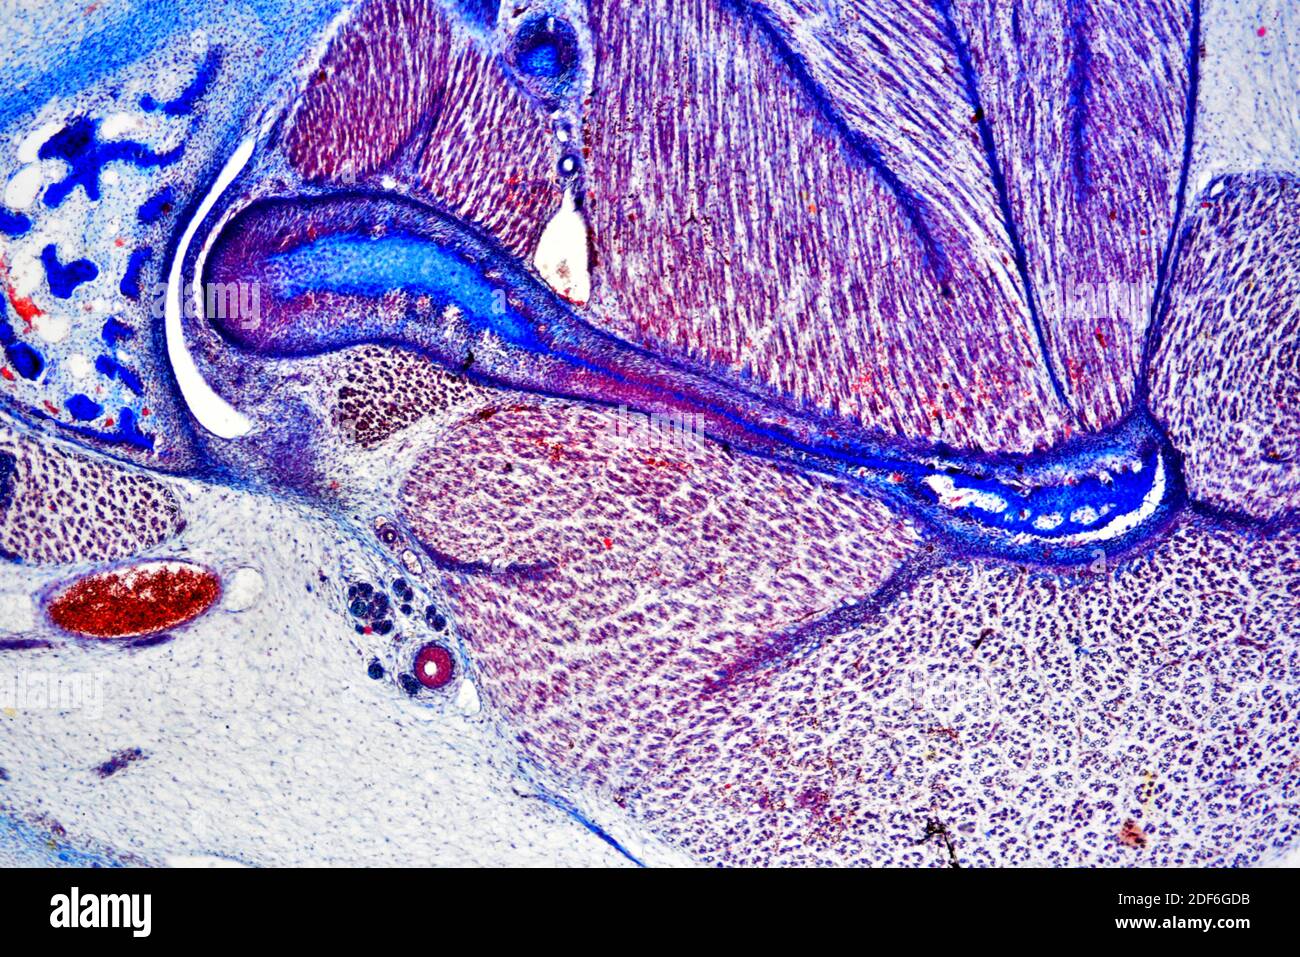 Inner ear with cochlea and tympani. Optical microscope X40. Stock Photo